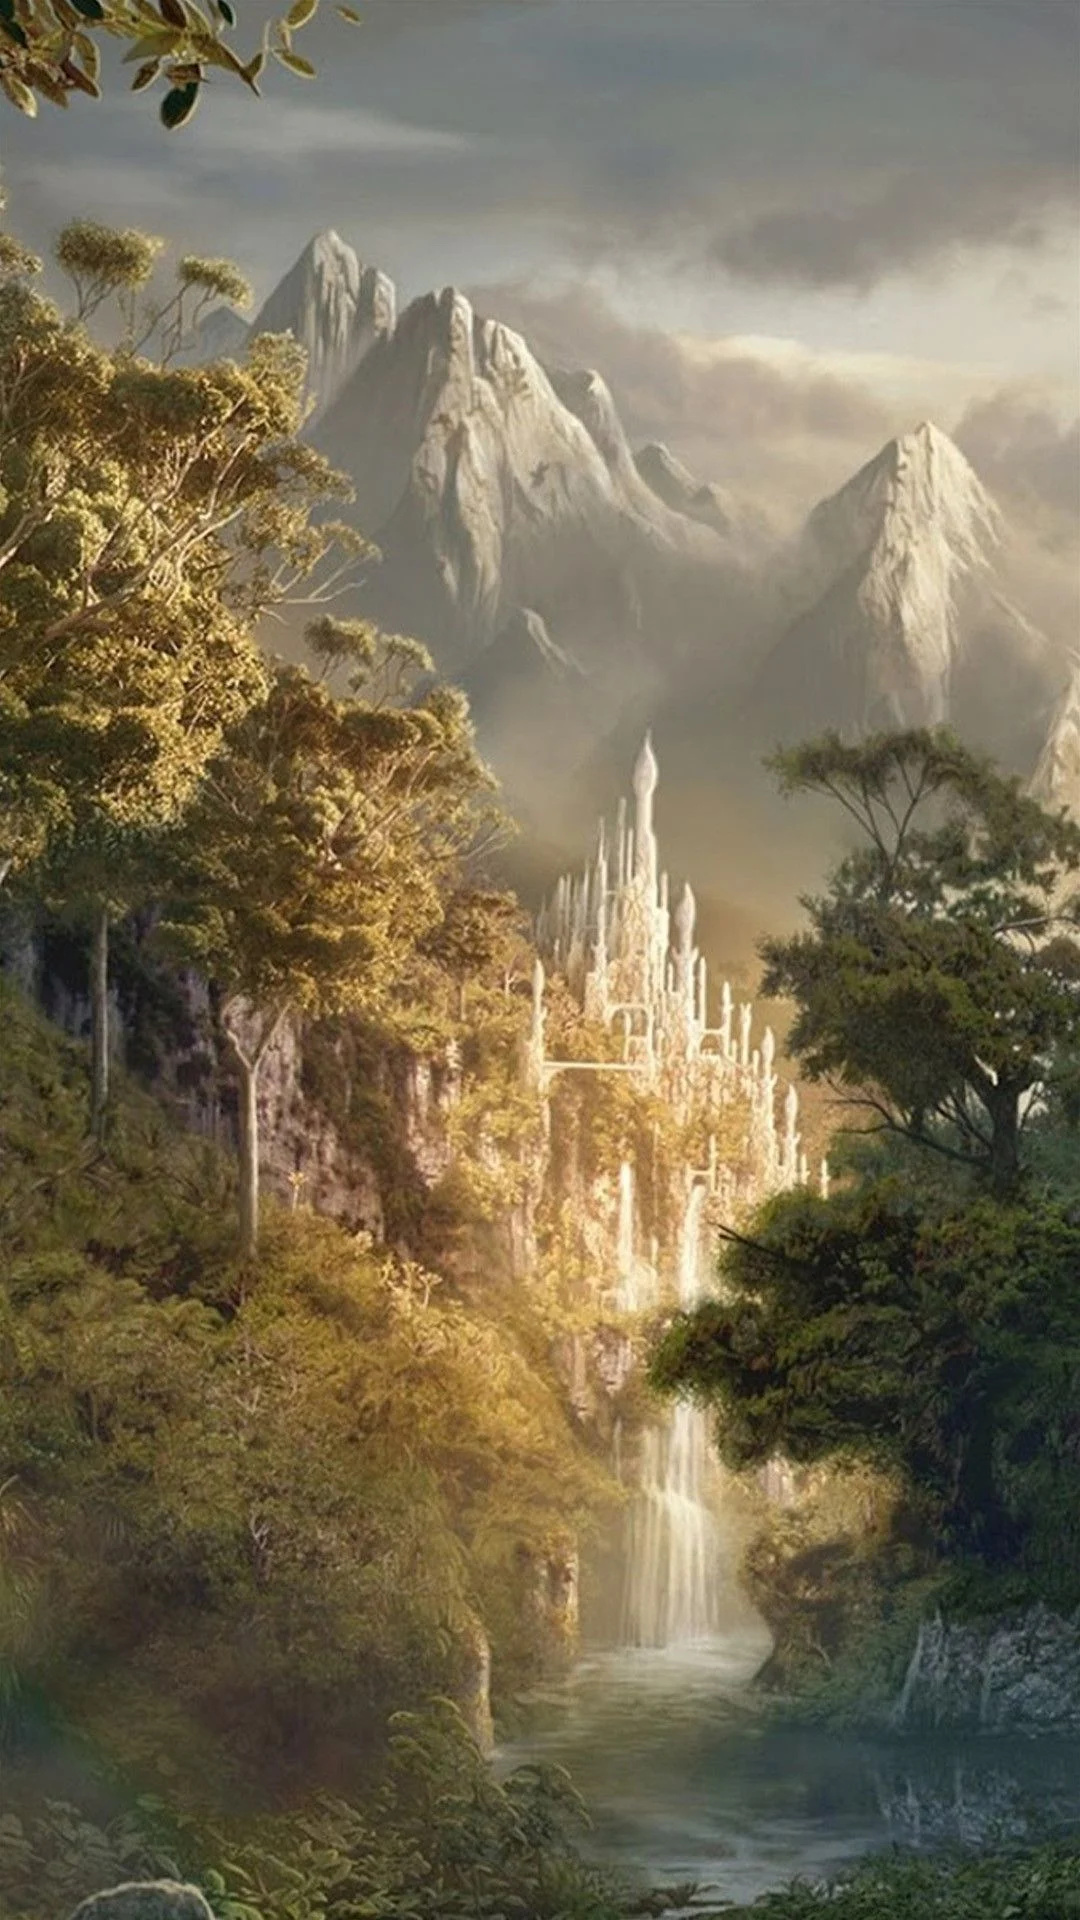 Lord of the Rings, iPhone wallpapers, Top picks, Middle-earth on your screen, 1080x1920 Full HD Phone